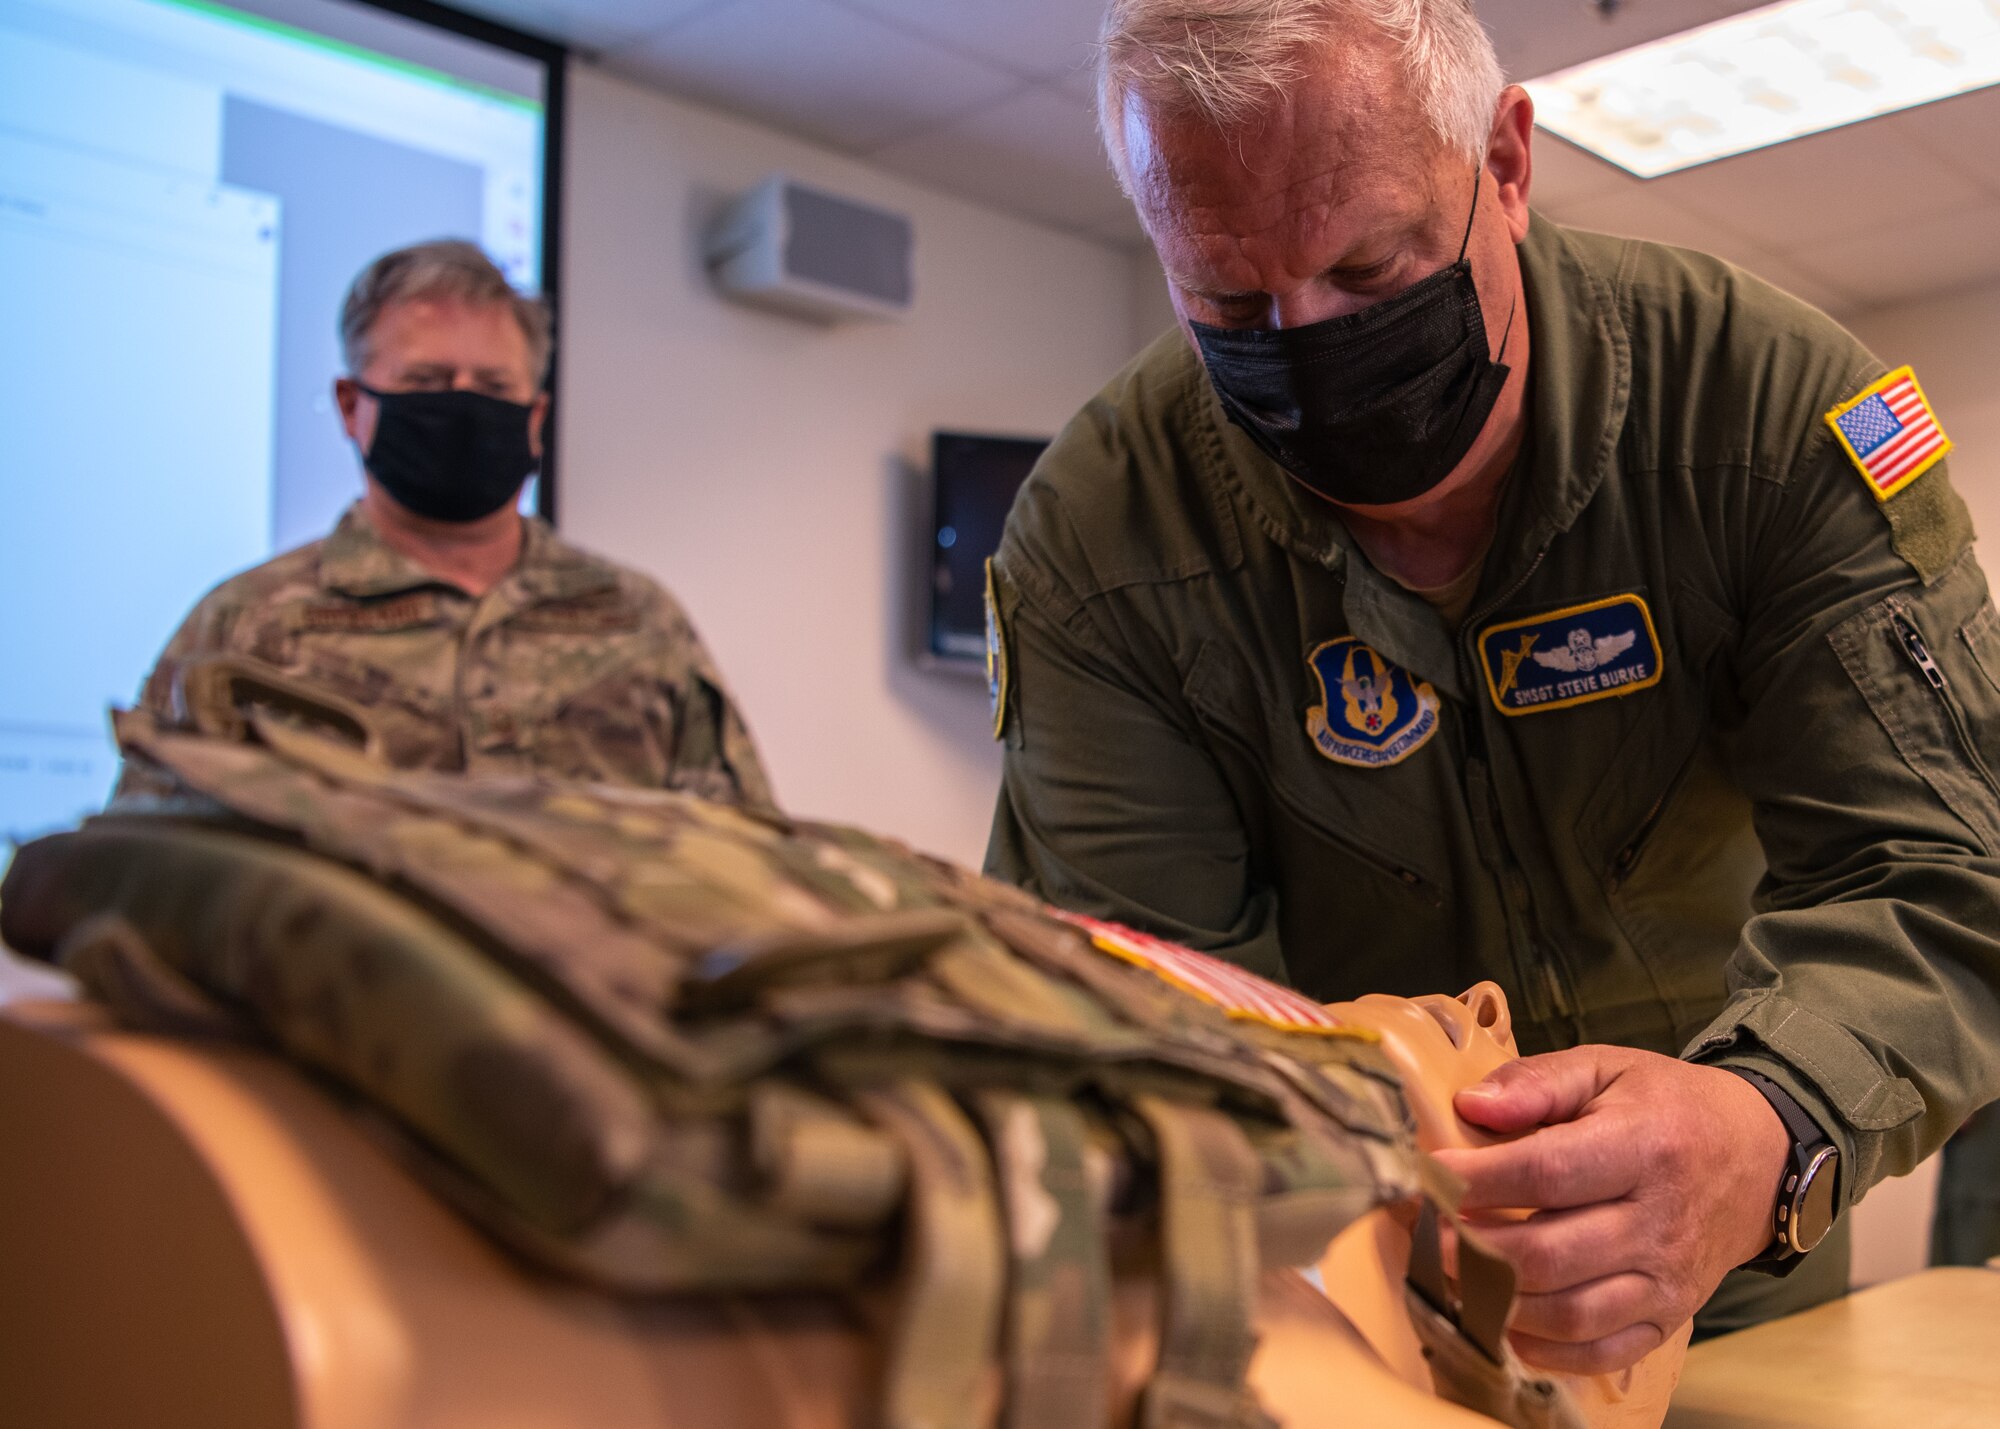 TCCC teaches life-saving skills and methods proven effective in a combat environment.